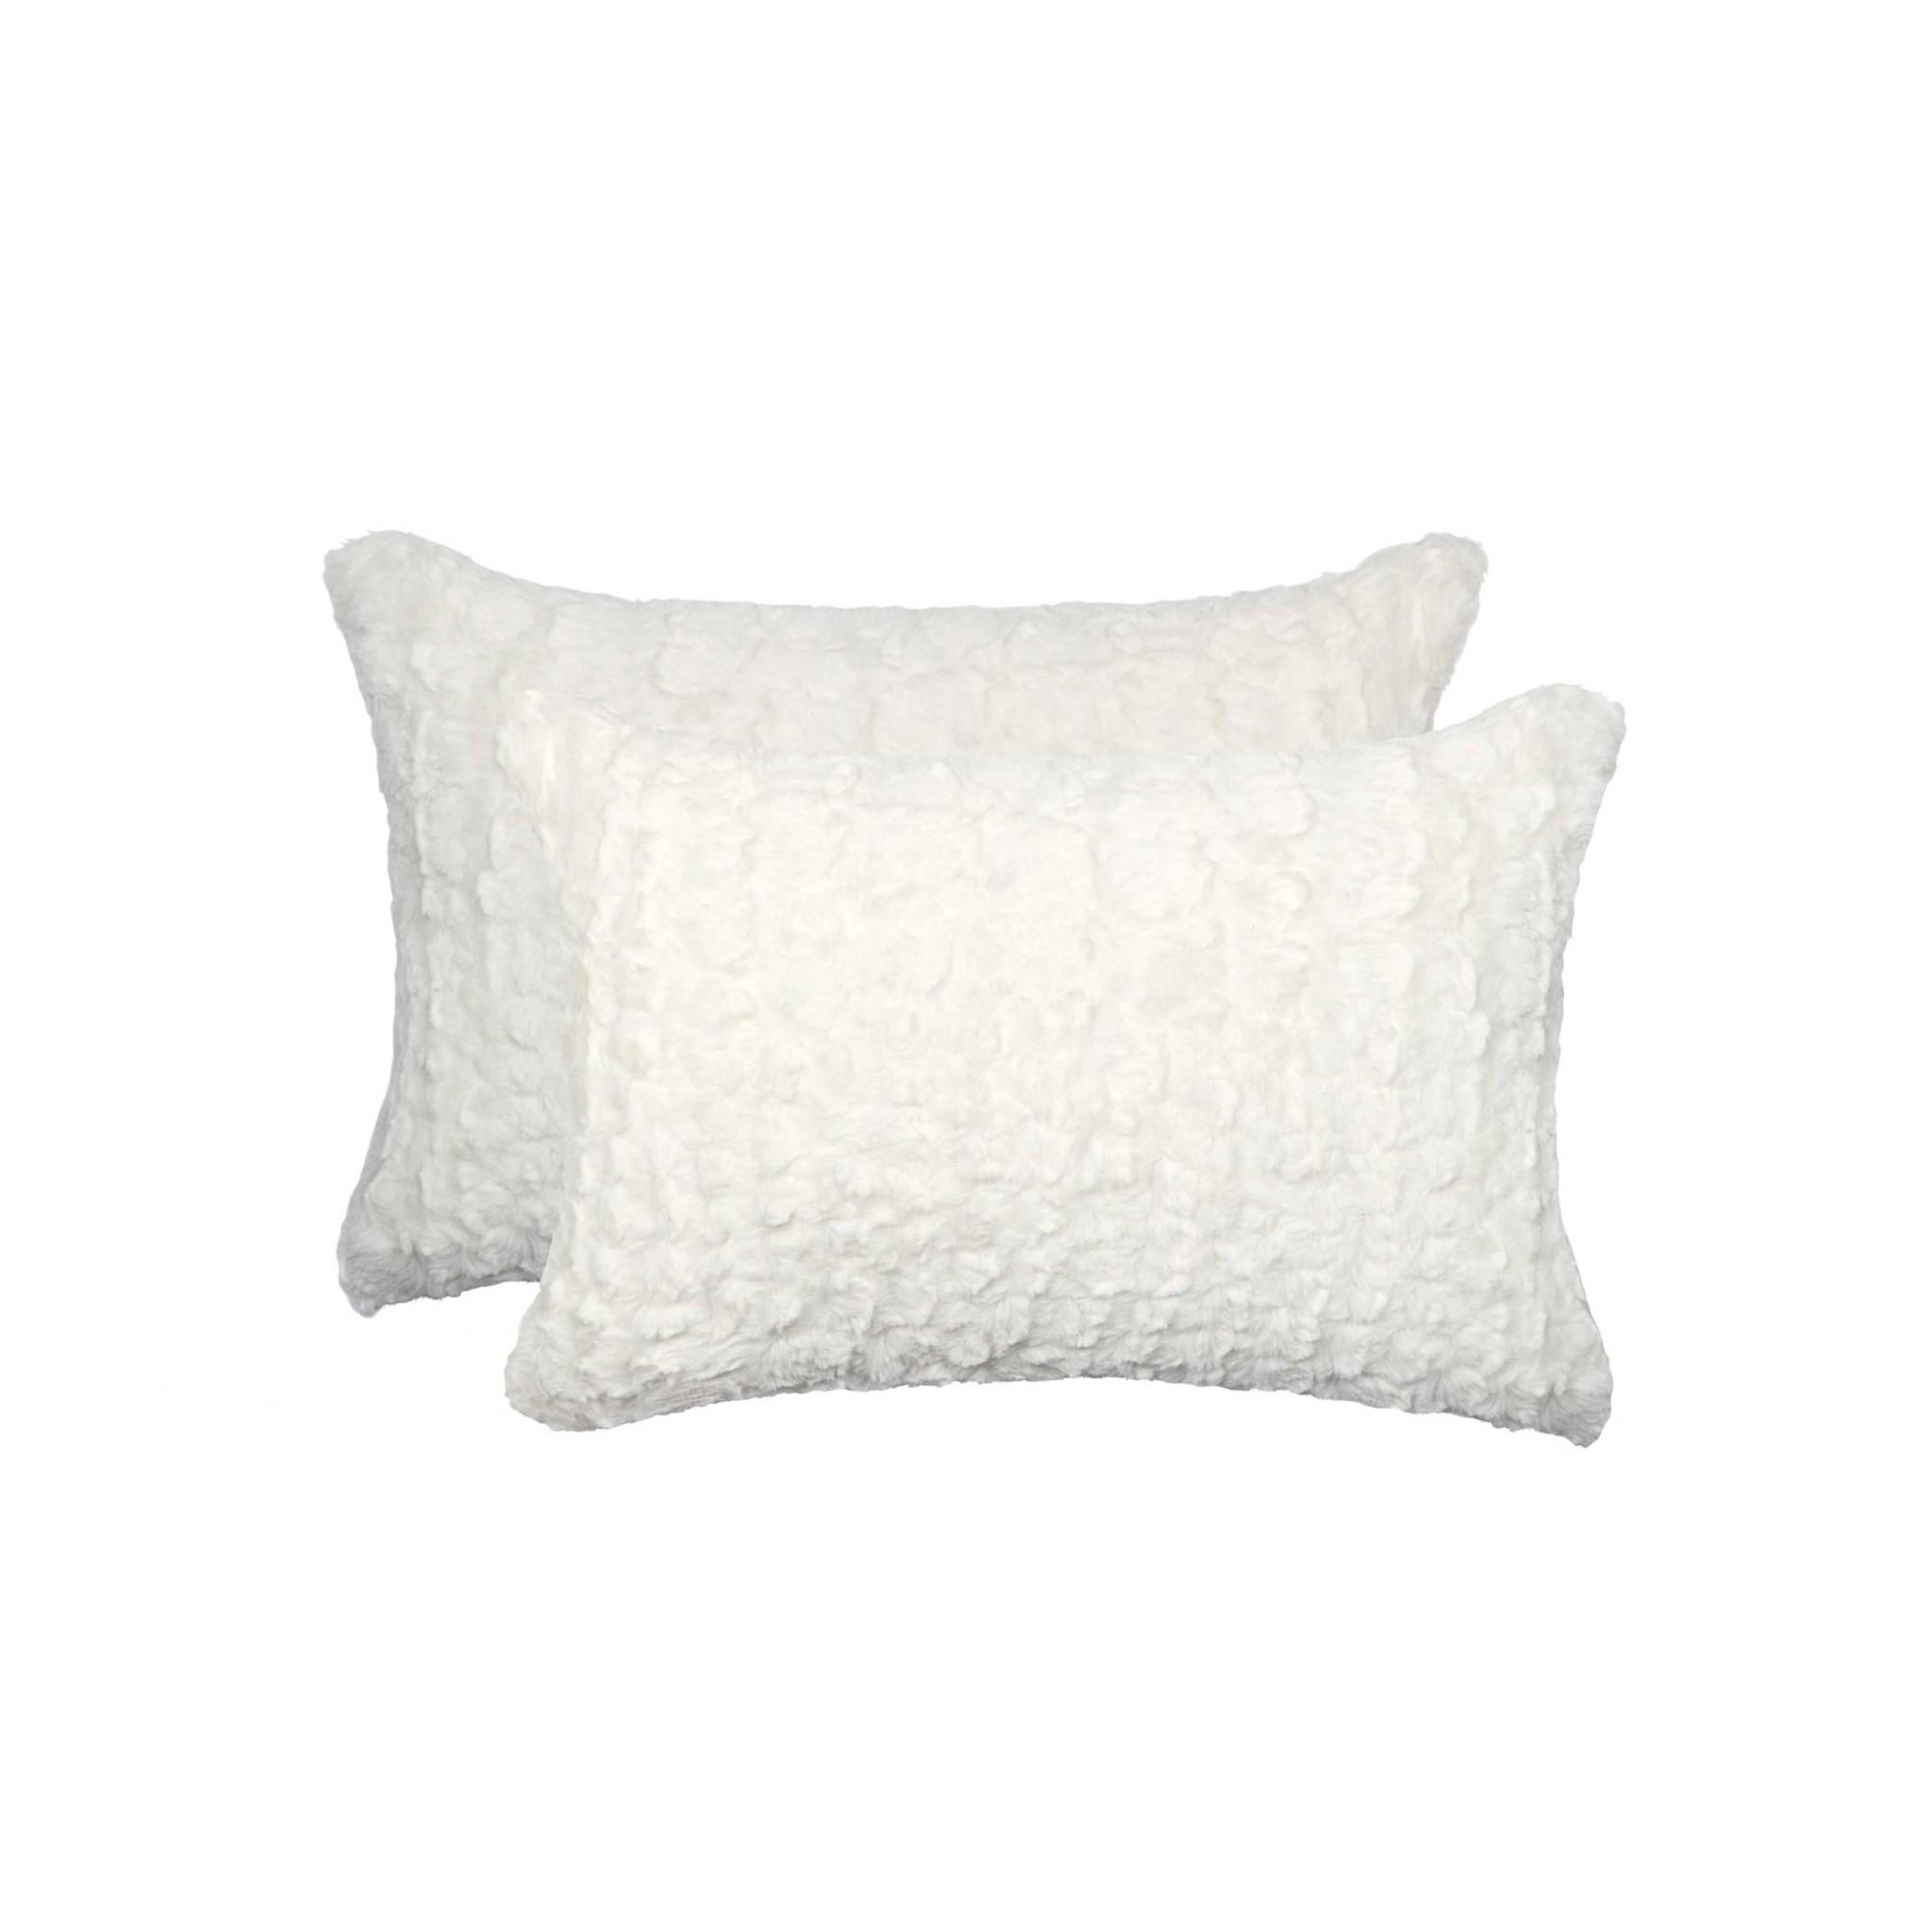 12" x 20" x 5" Ivory Mink, Faux - Pillow 2-Pack